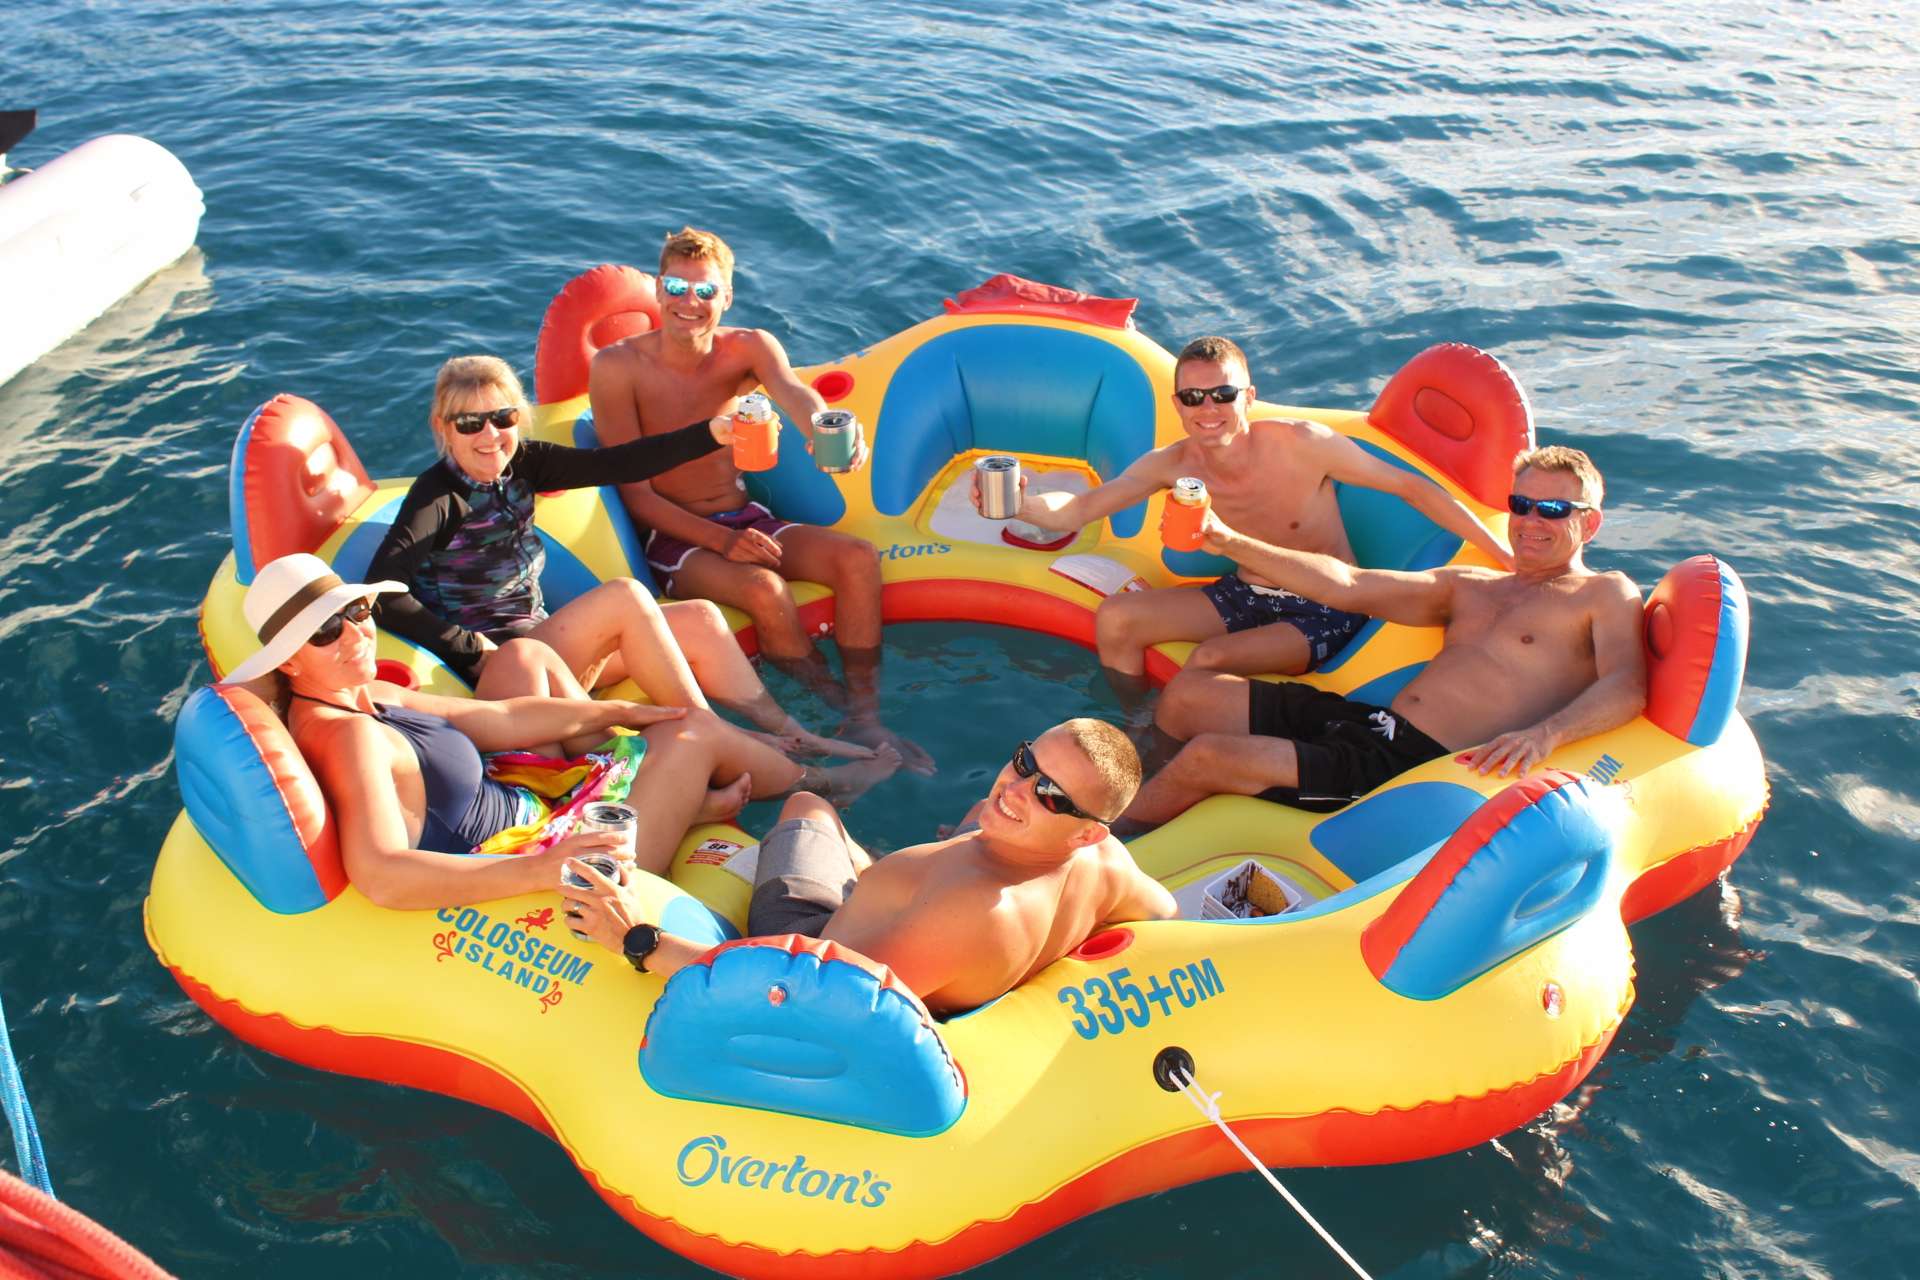 6 big comfy beanbags make riding on the trampoline while under sail a joy!  Cocktails anyone?